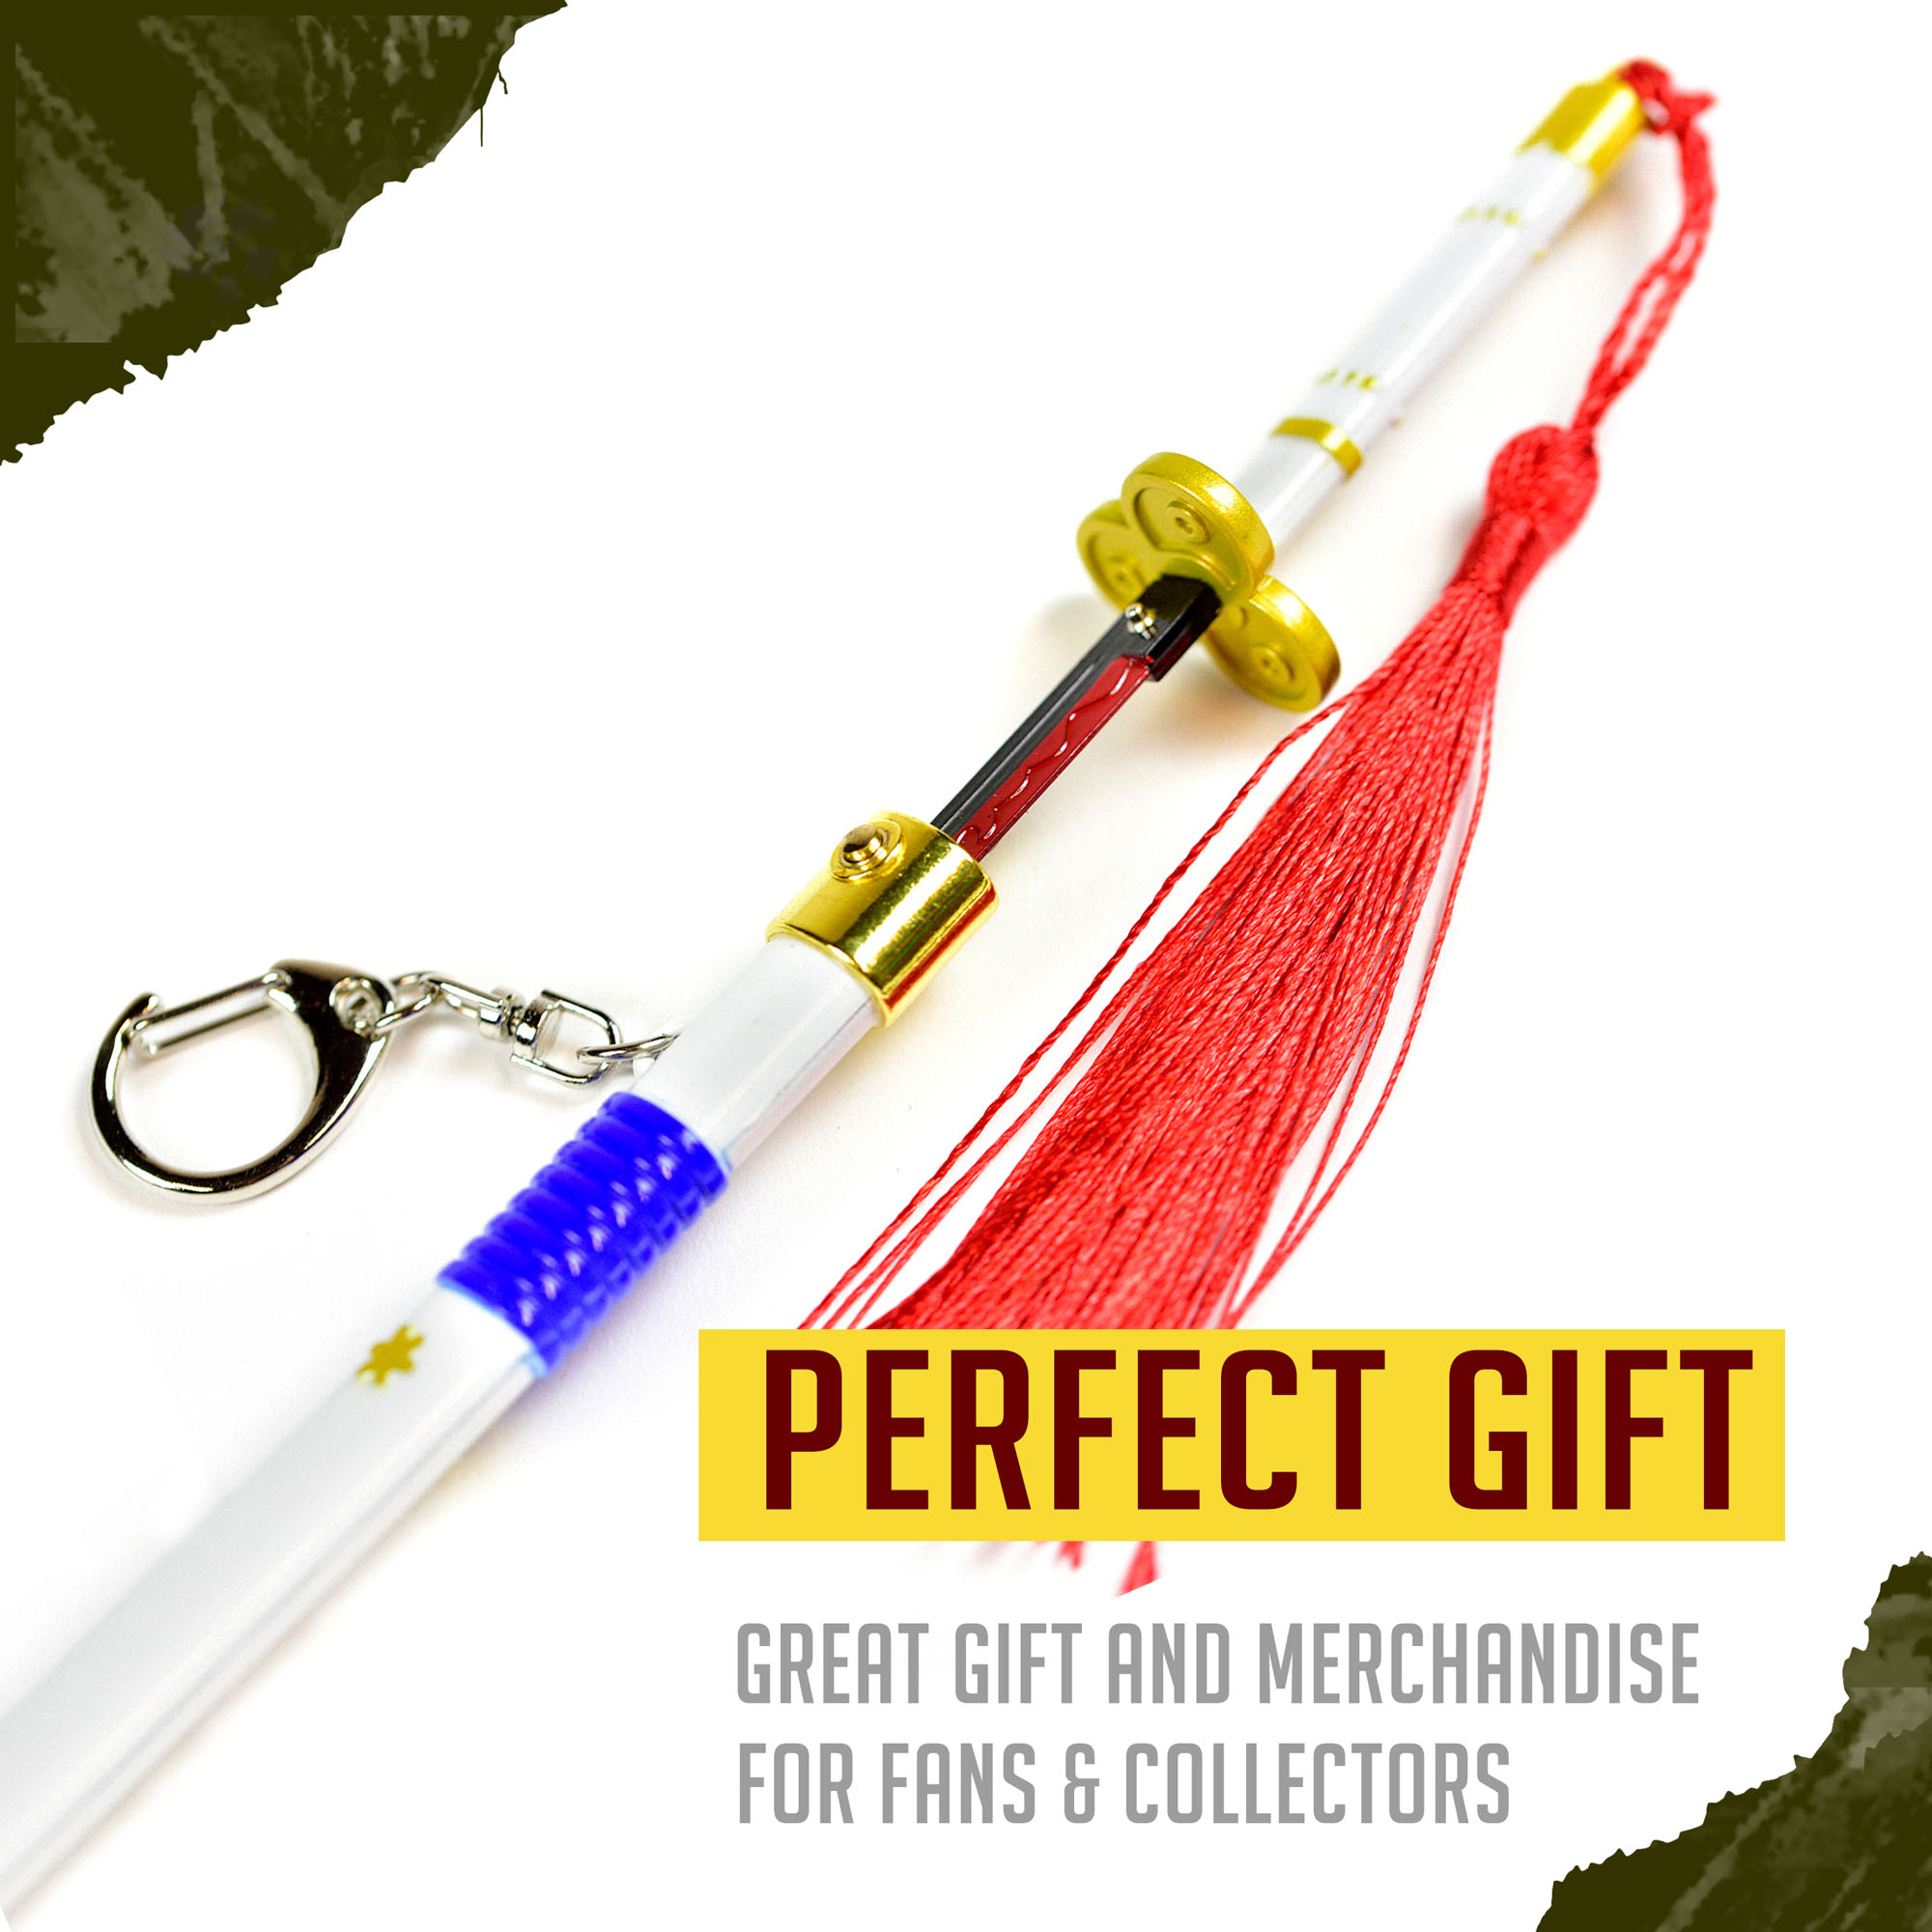 One Piece - Oden's Ame No Habakiri Sword - Letter Opener Version with Stand